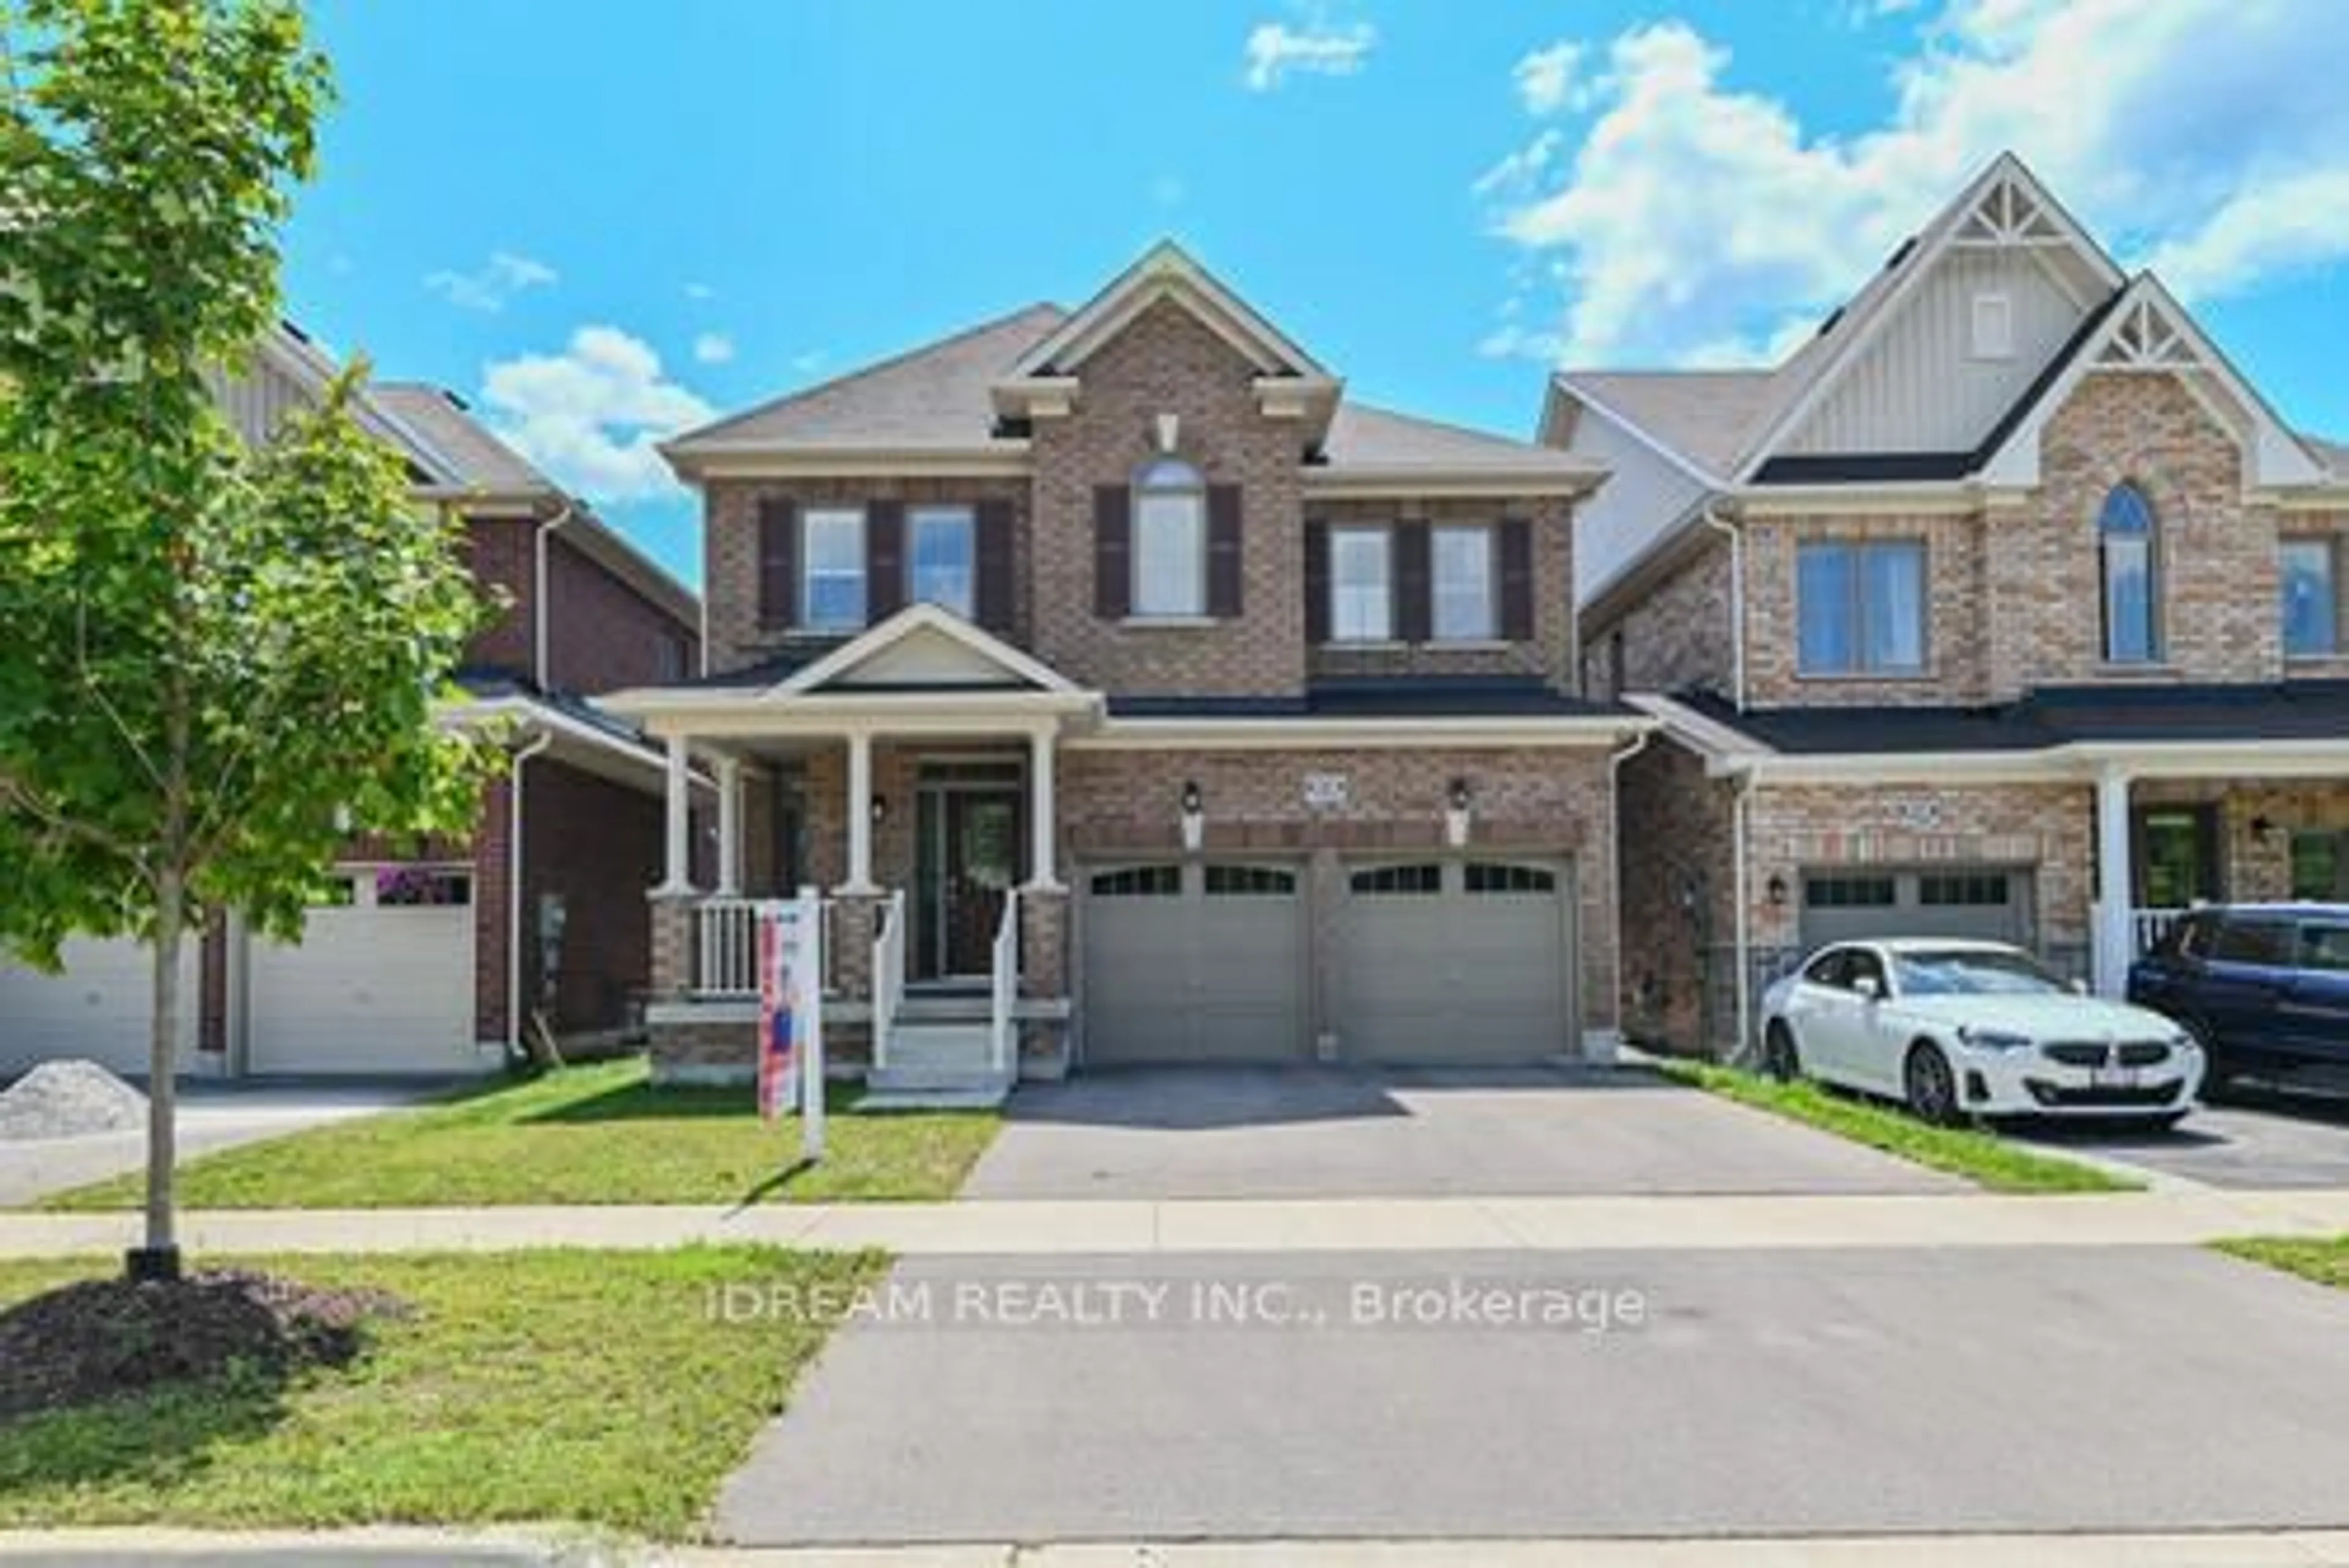 Frontside or backside of a home for 41 Ronald Hooper Ave, Clarington Ontario L1C 7G8